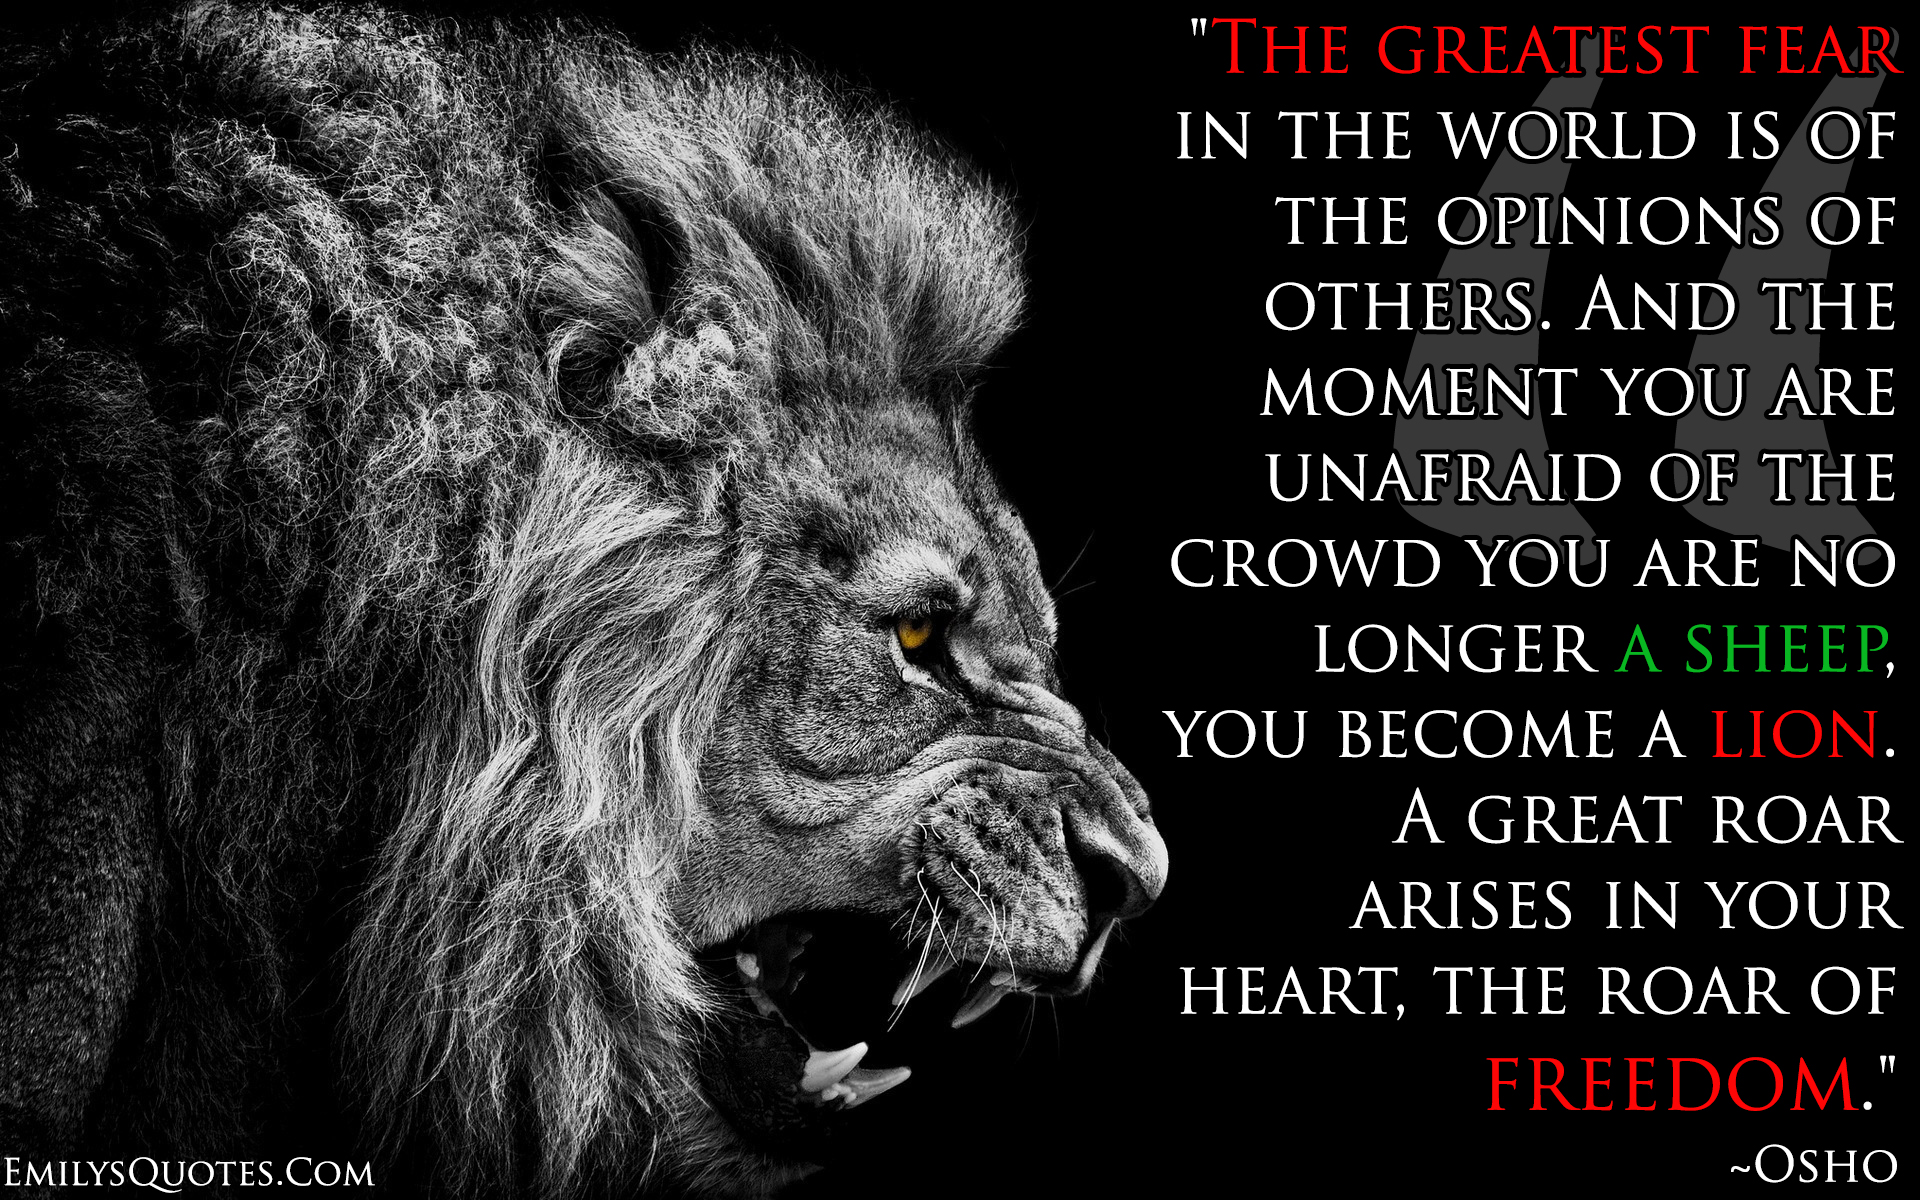 The greatest fear in the world is of the opinions of others. And the moment you are unafraid of the crowd